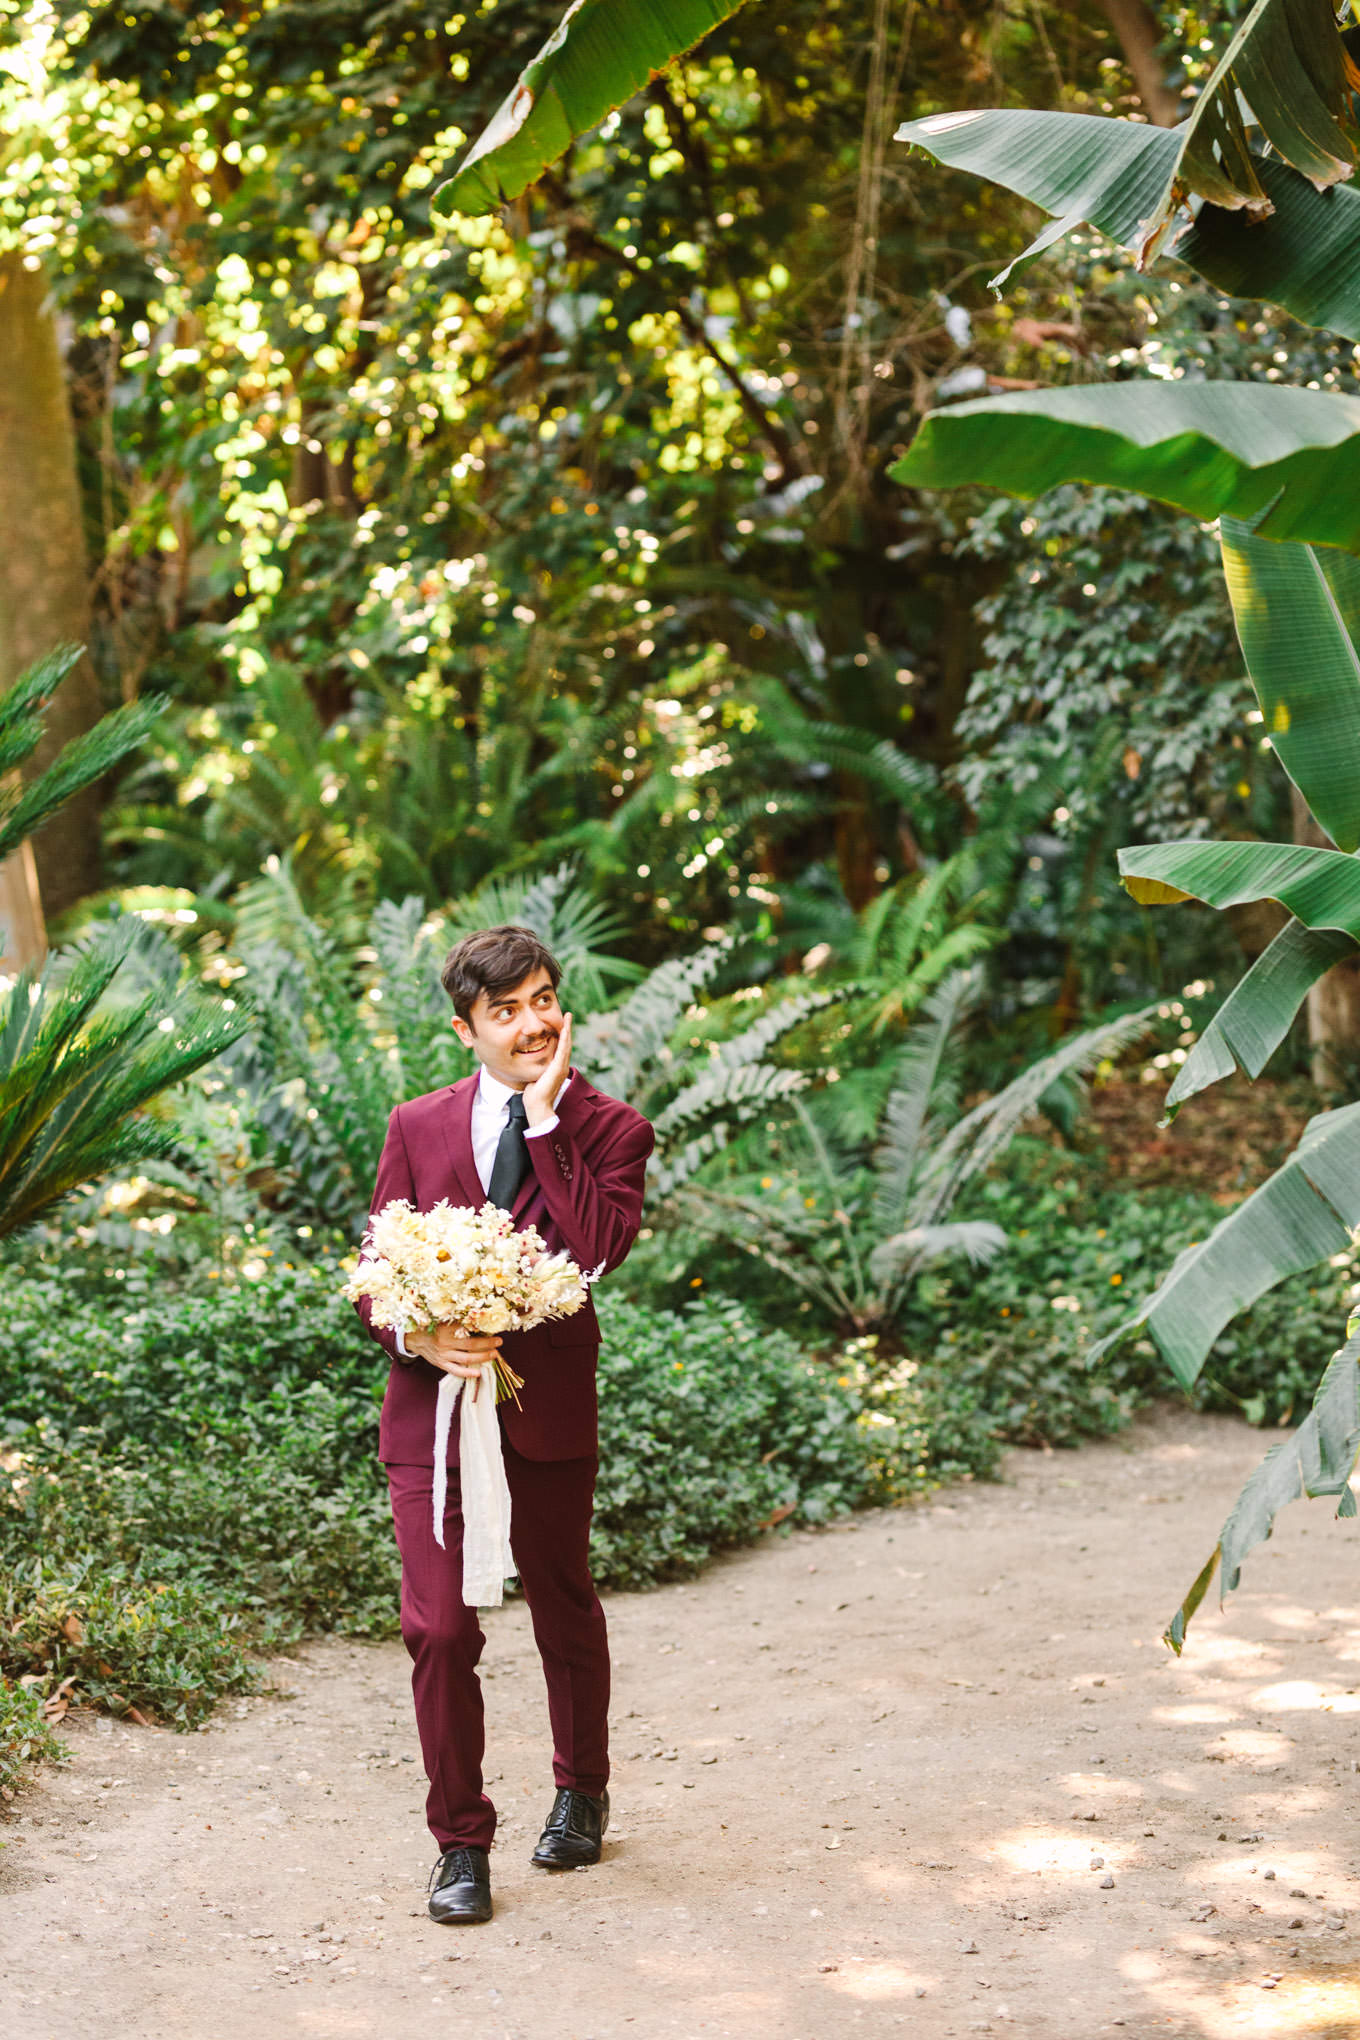 Groom walking with the bride's bouquet | Los Angeles Arboretum Elopement | Colorful and elevated wedding photography for fun-loving couples in Southern California | #LosAngelesElopement #elopement #LAarboretum #LAskyline #elopementphotos   Source: Mary Costa Photography | Los Angeles